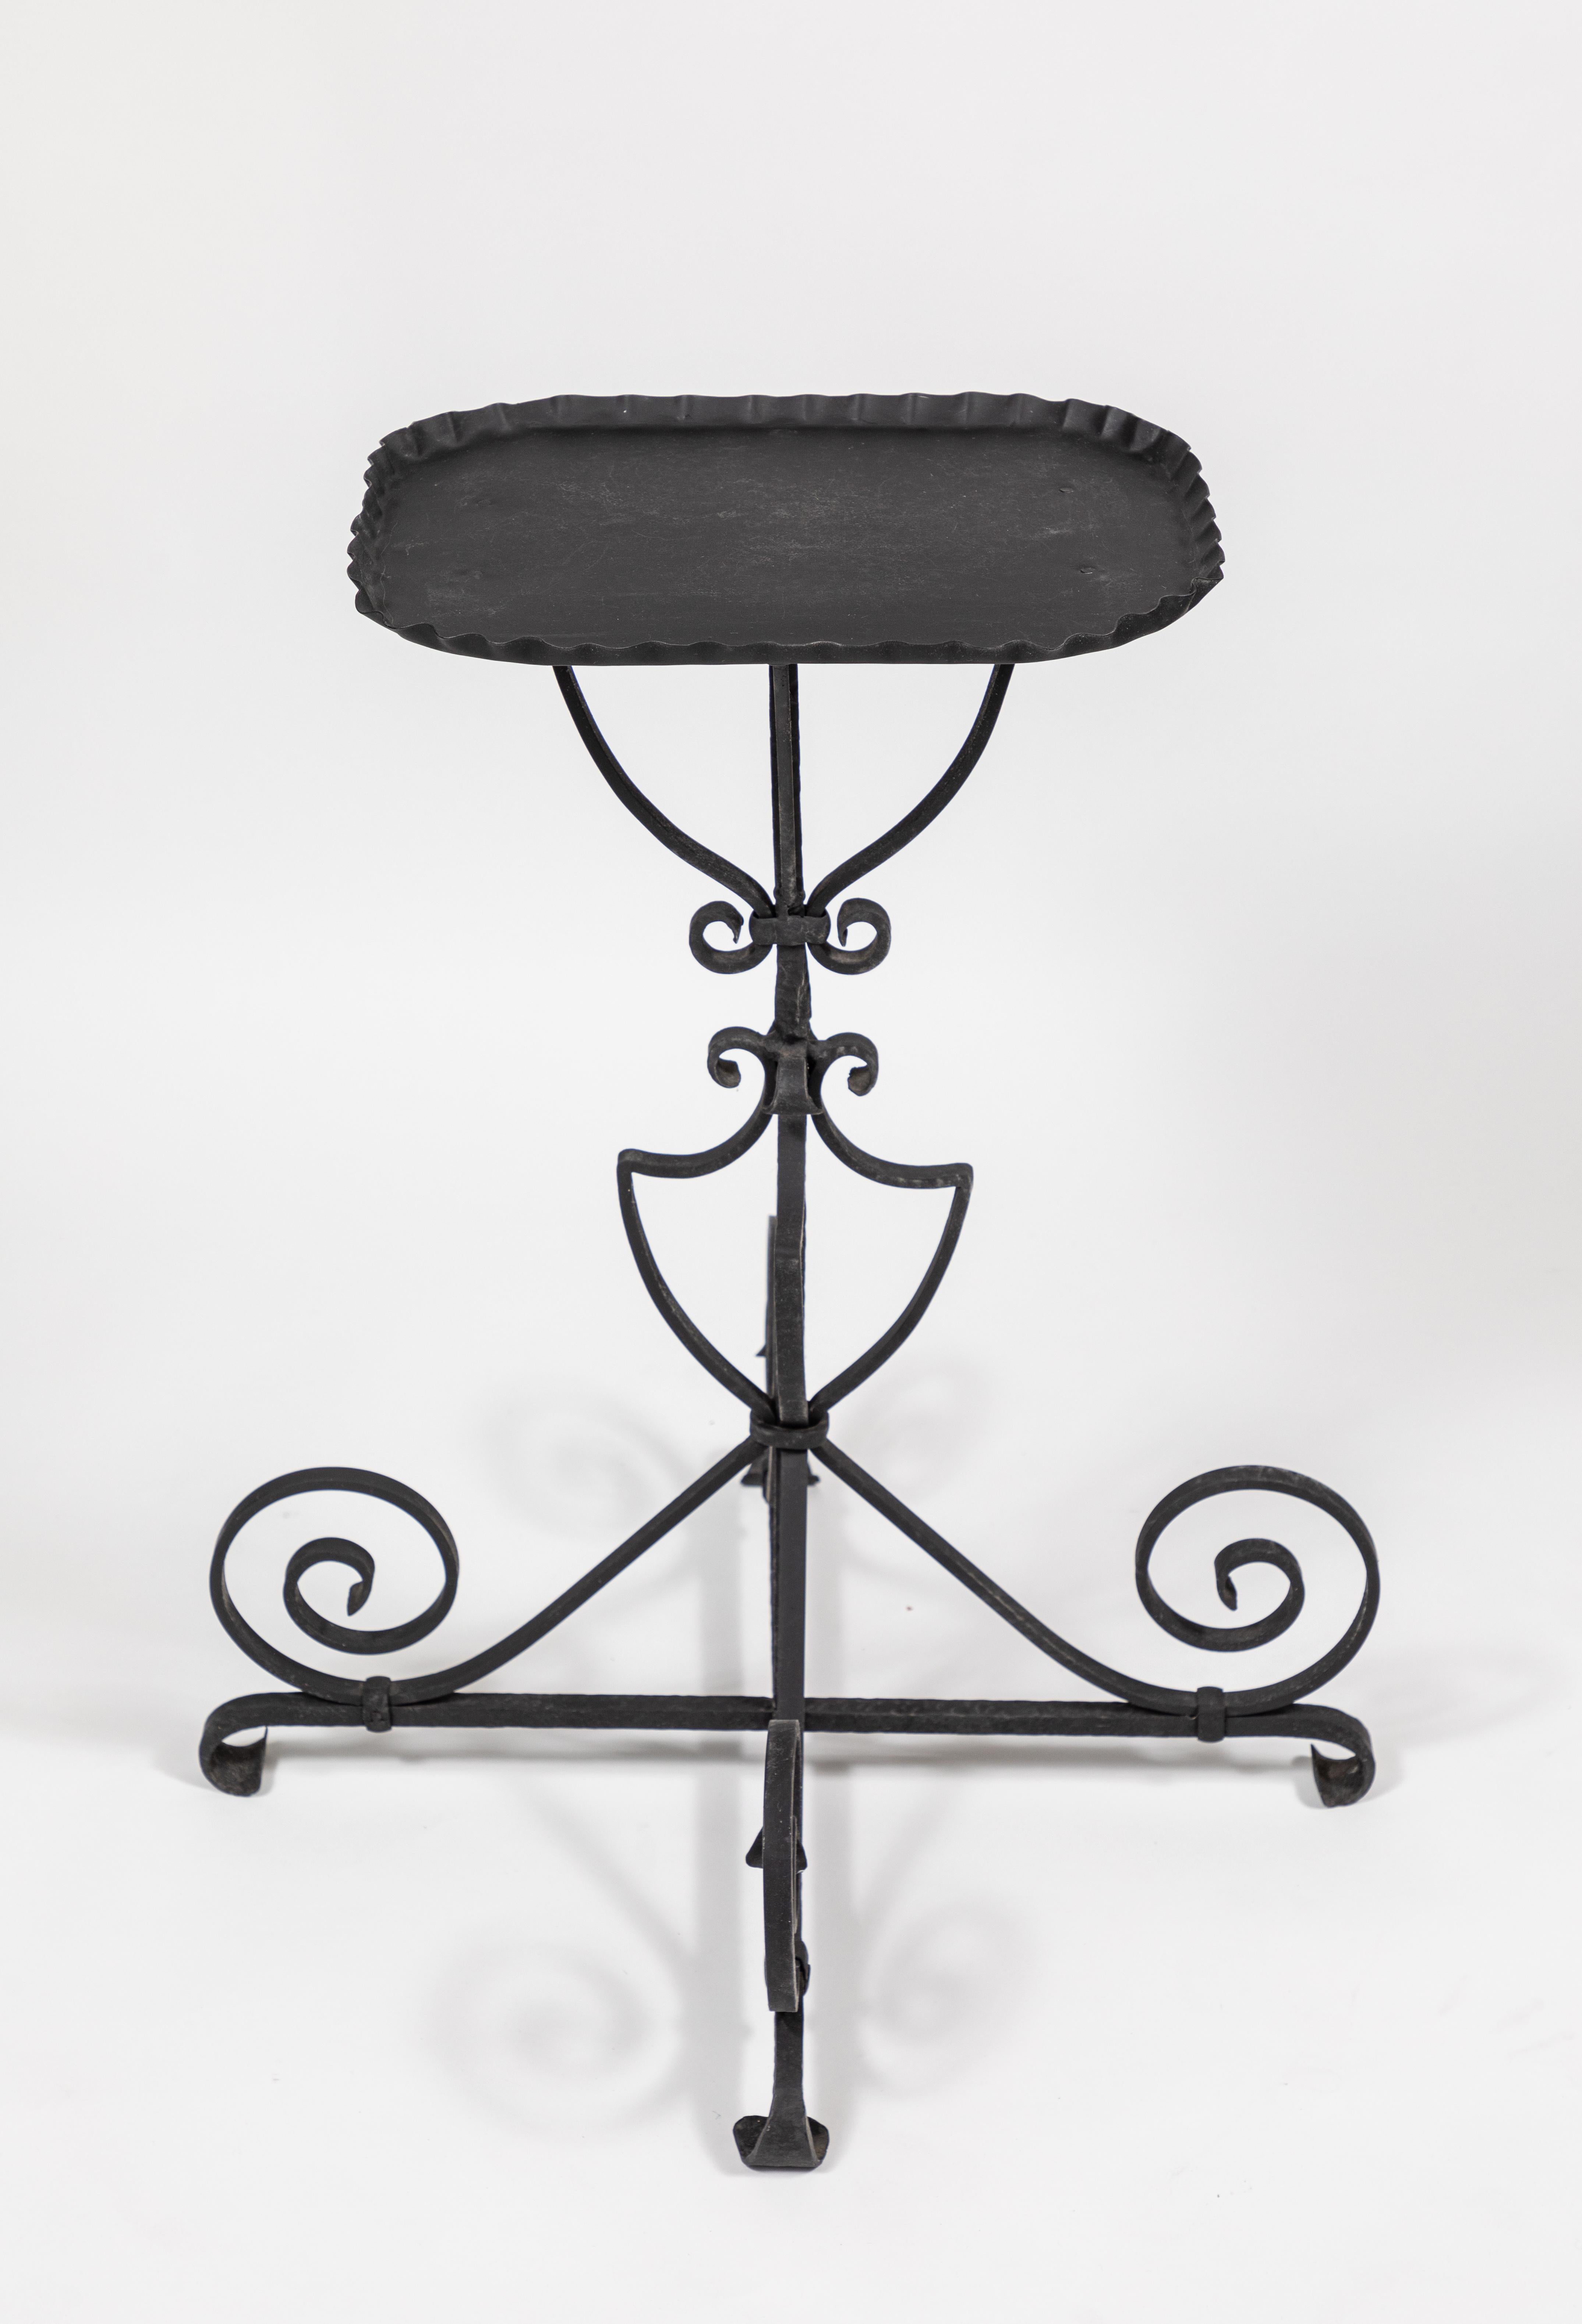 Vintage iron side table featuring a sculptural and graceful scrolled base.

New black painted finish

Overall dimensions: 23